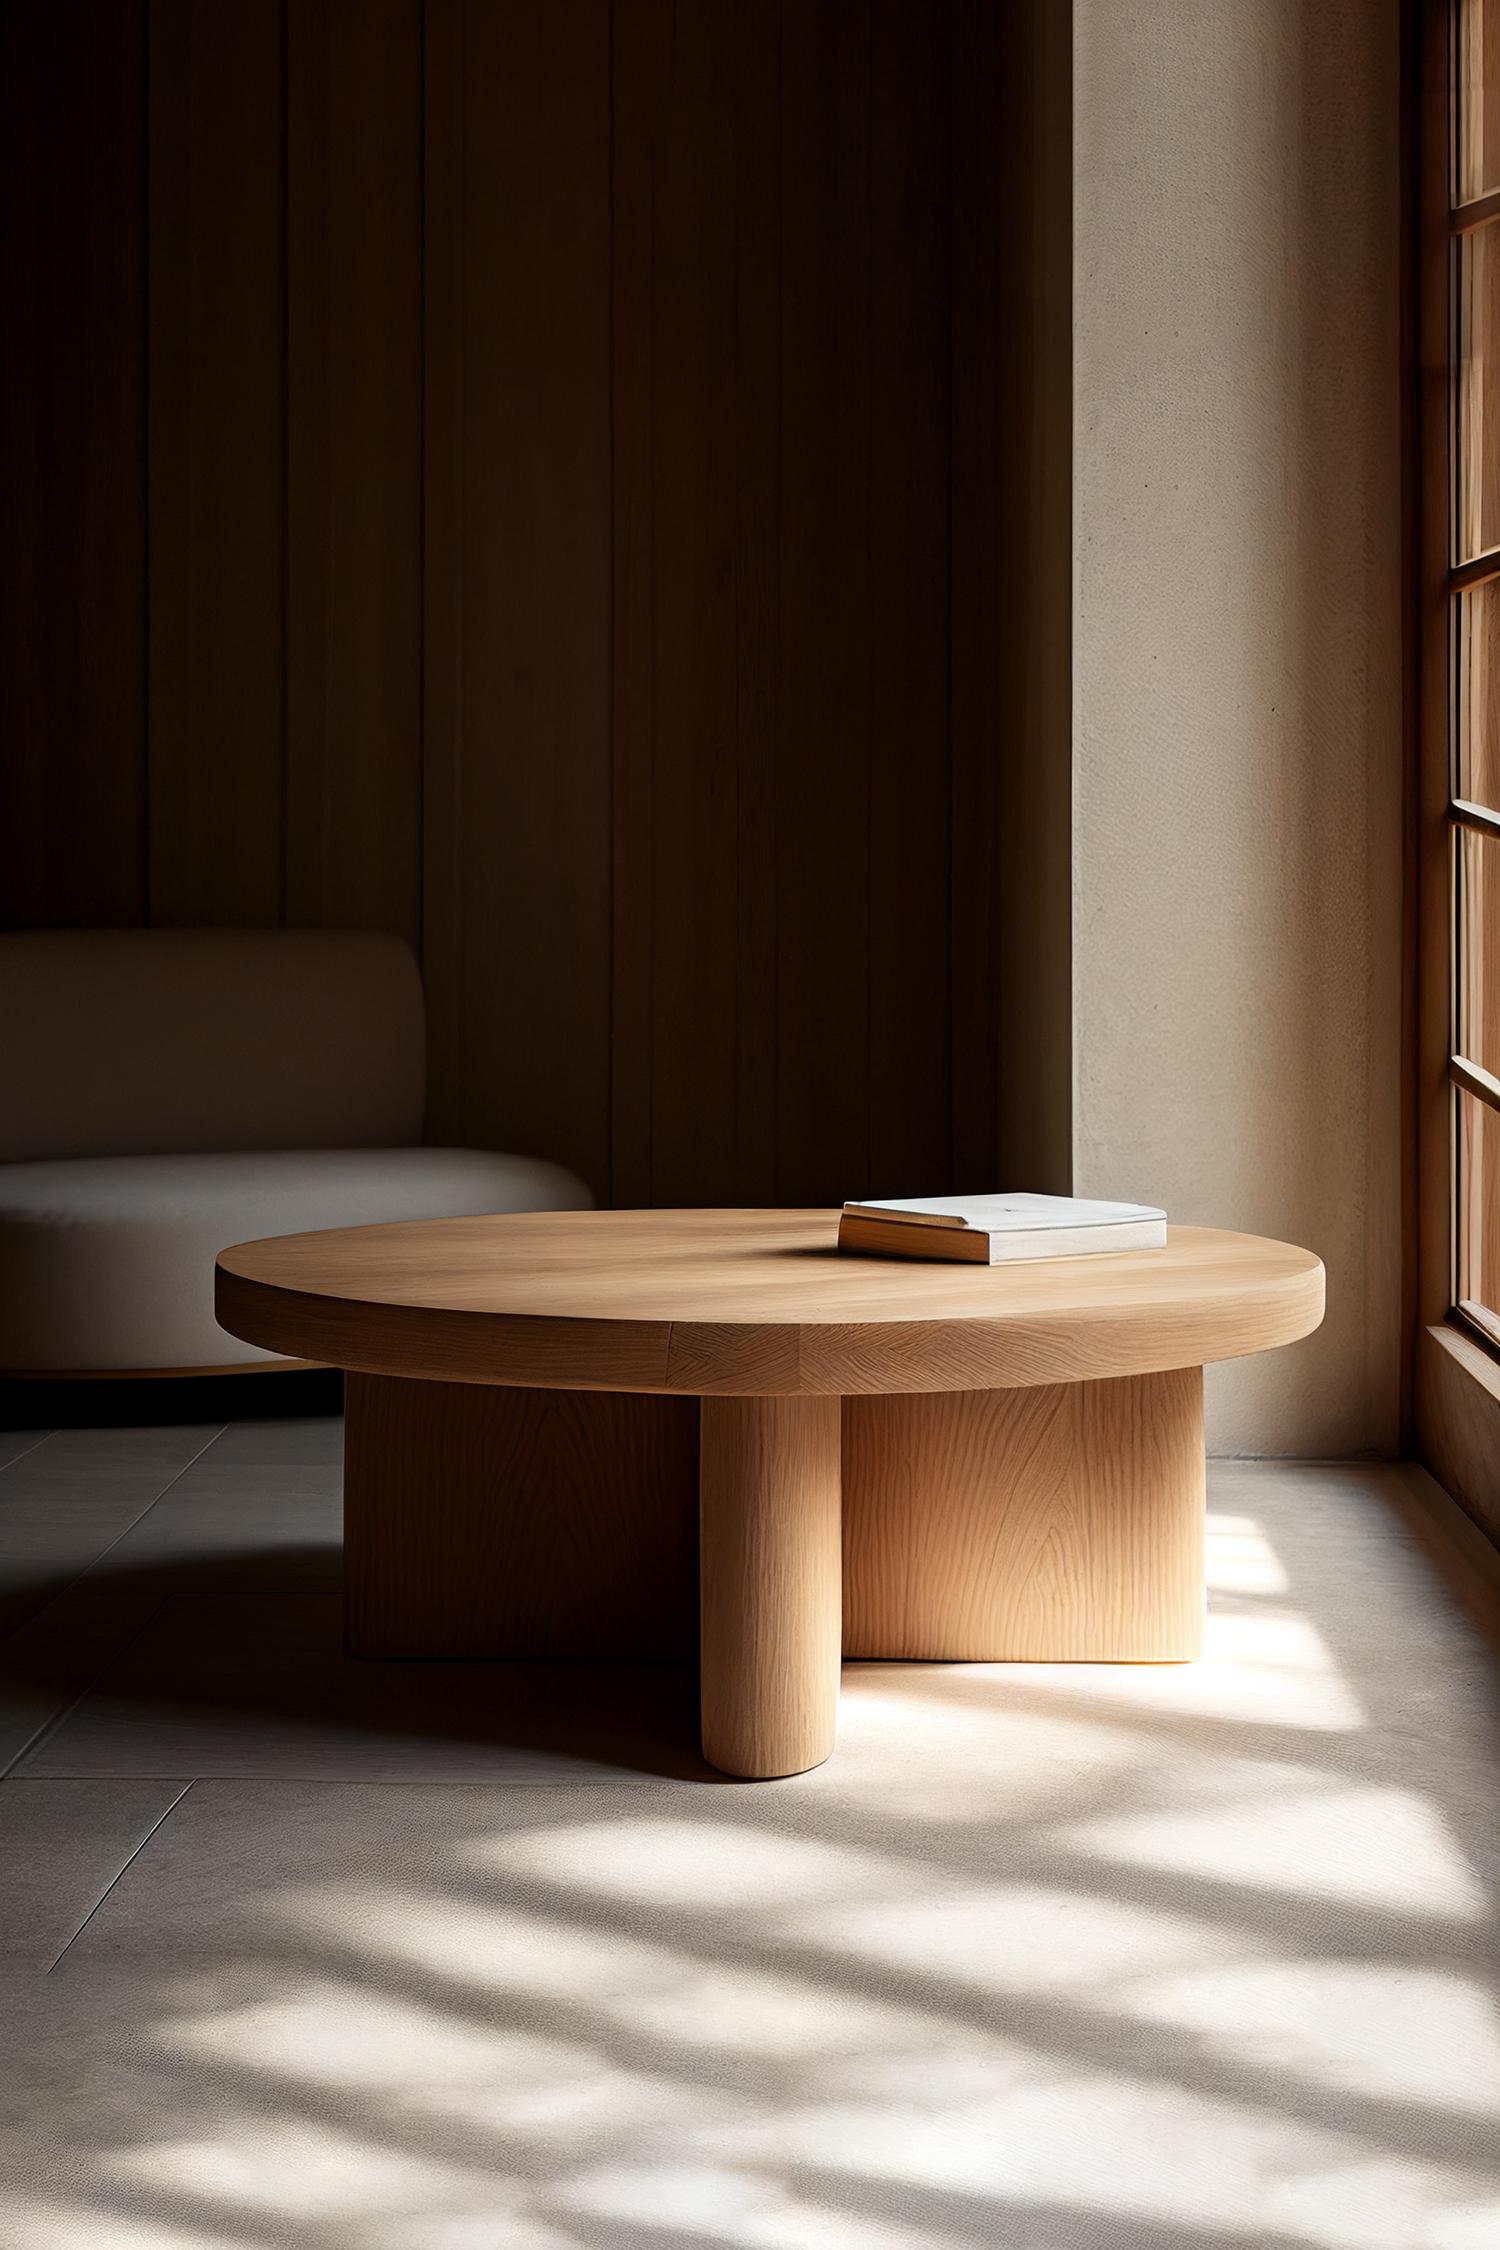 Round coffee table with cross legs made of solid oak.
Product made to order; some variances may apply to the final piece.

——

NONO is a Mexican design brand with more than 10 years of experience dedicated to the production of interior furnishings,